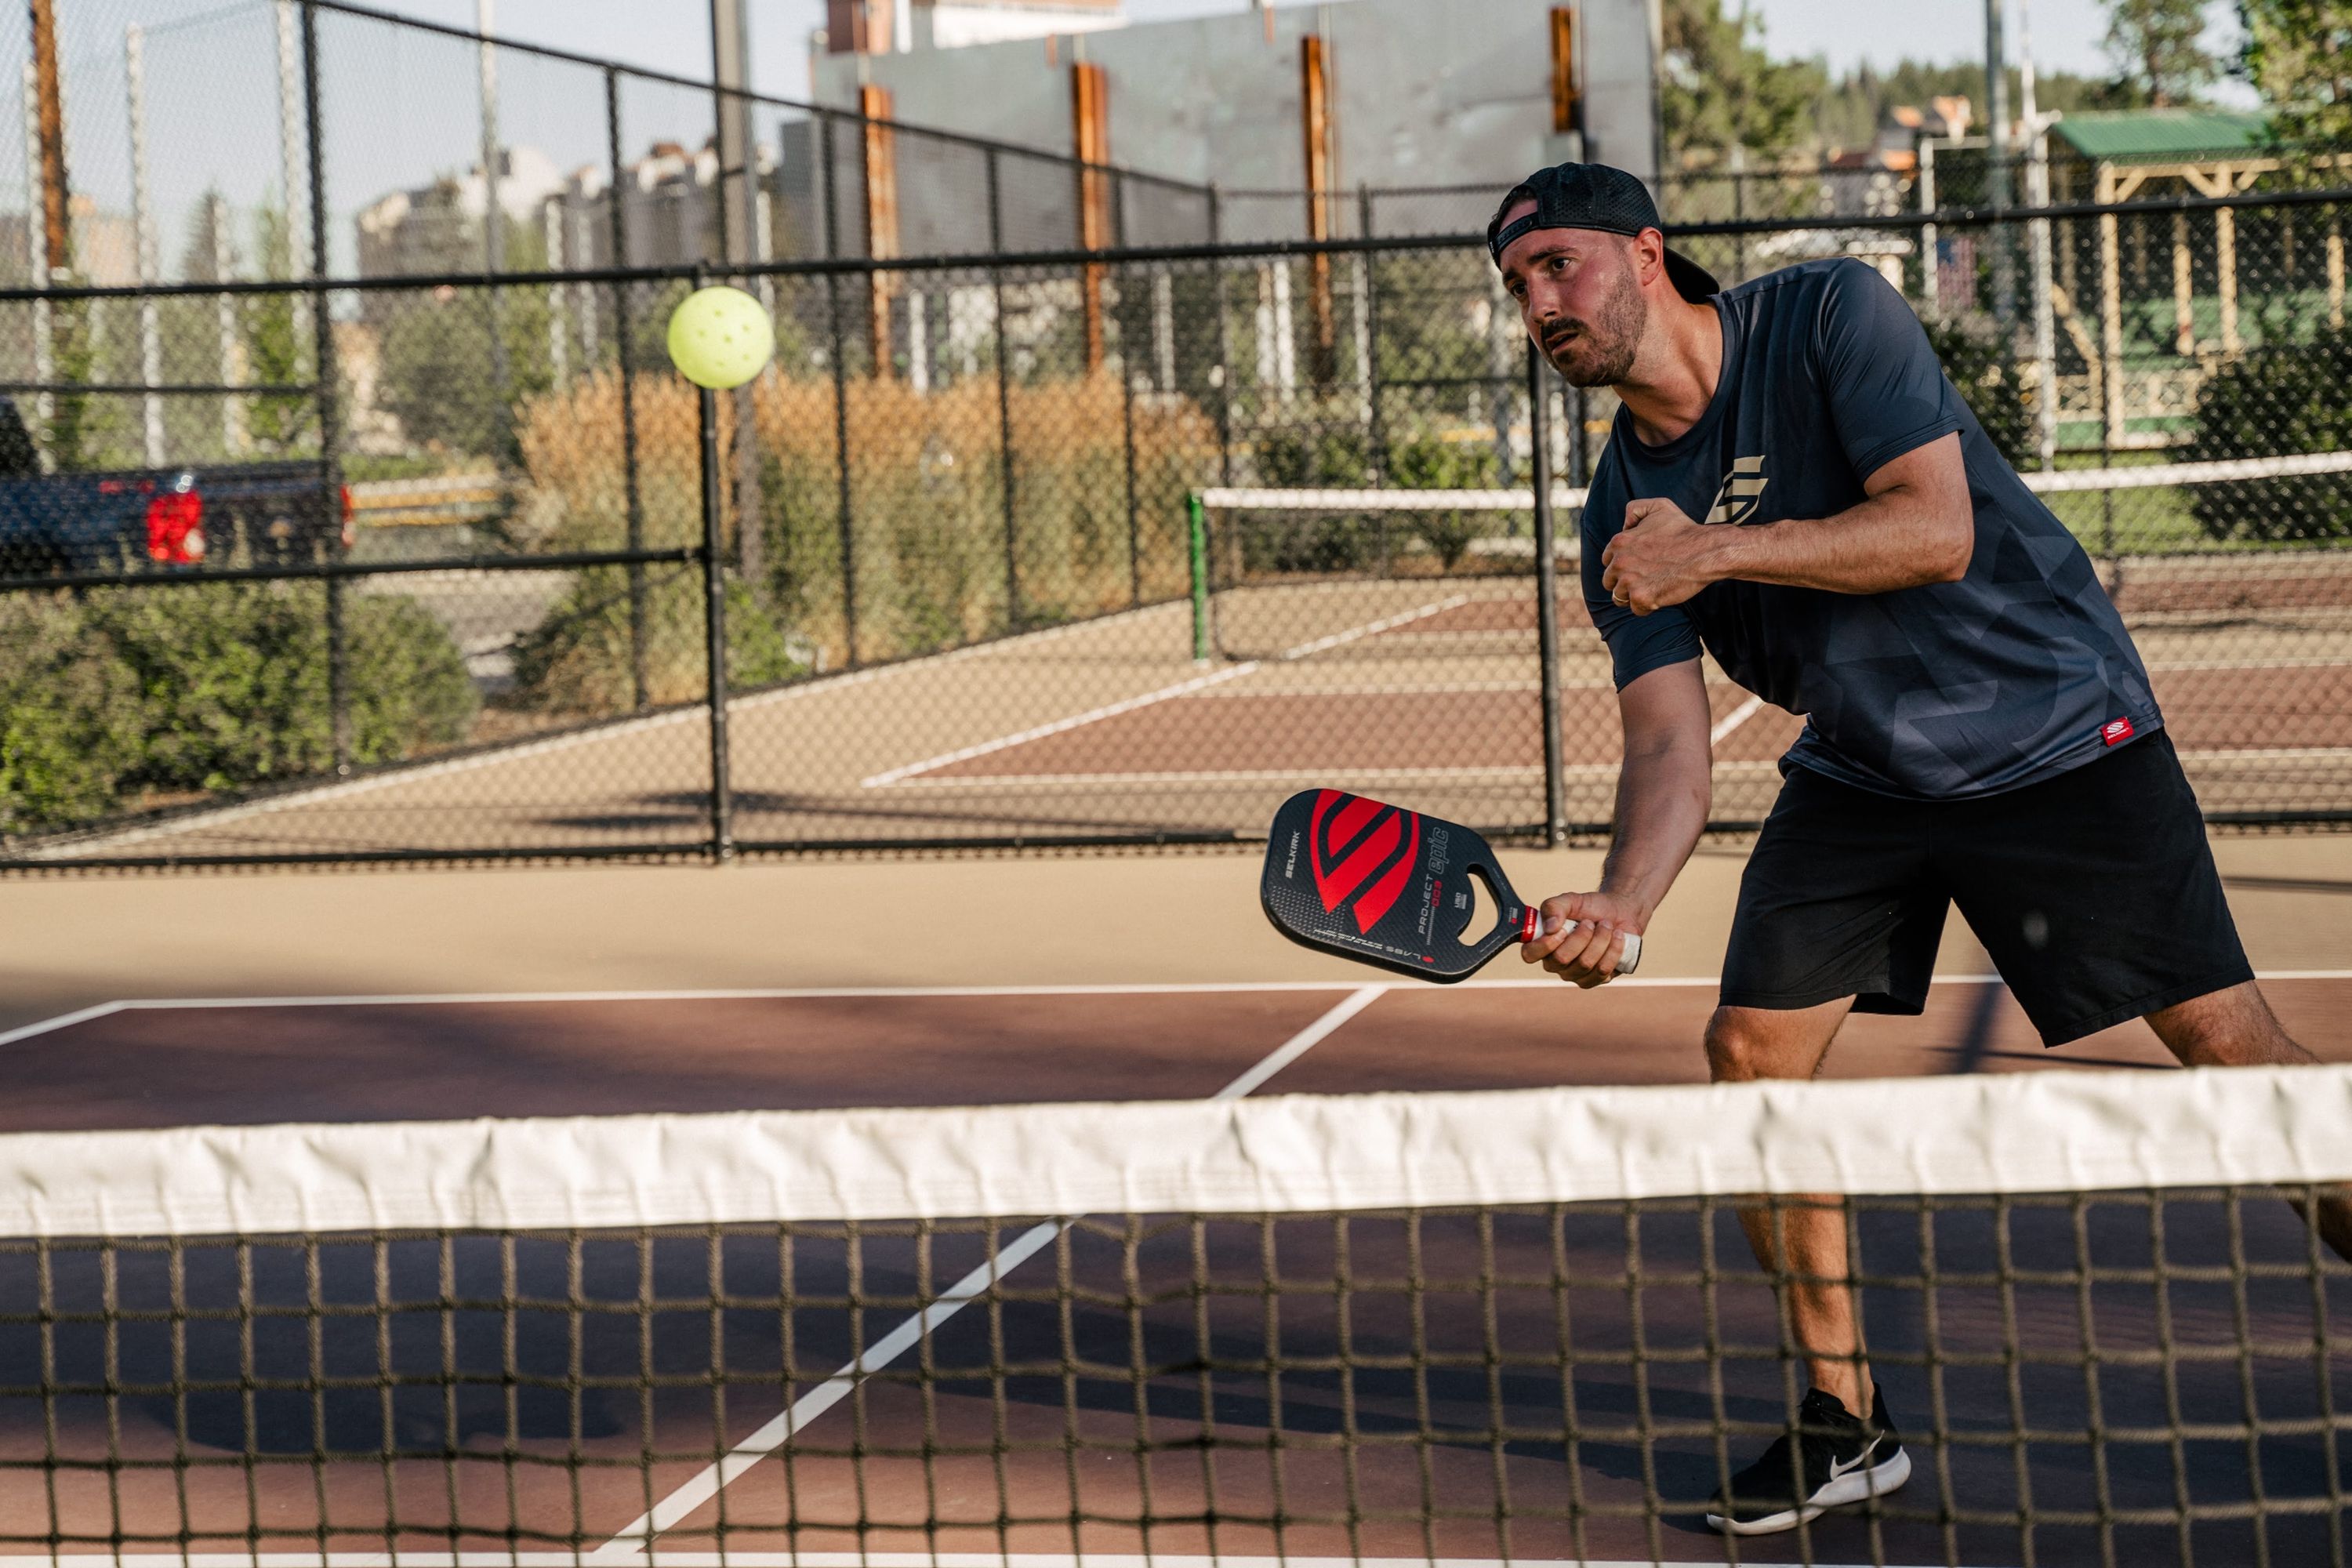 What basic skills do you need to get started as a beginner in pickleball?